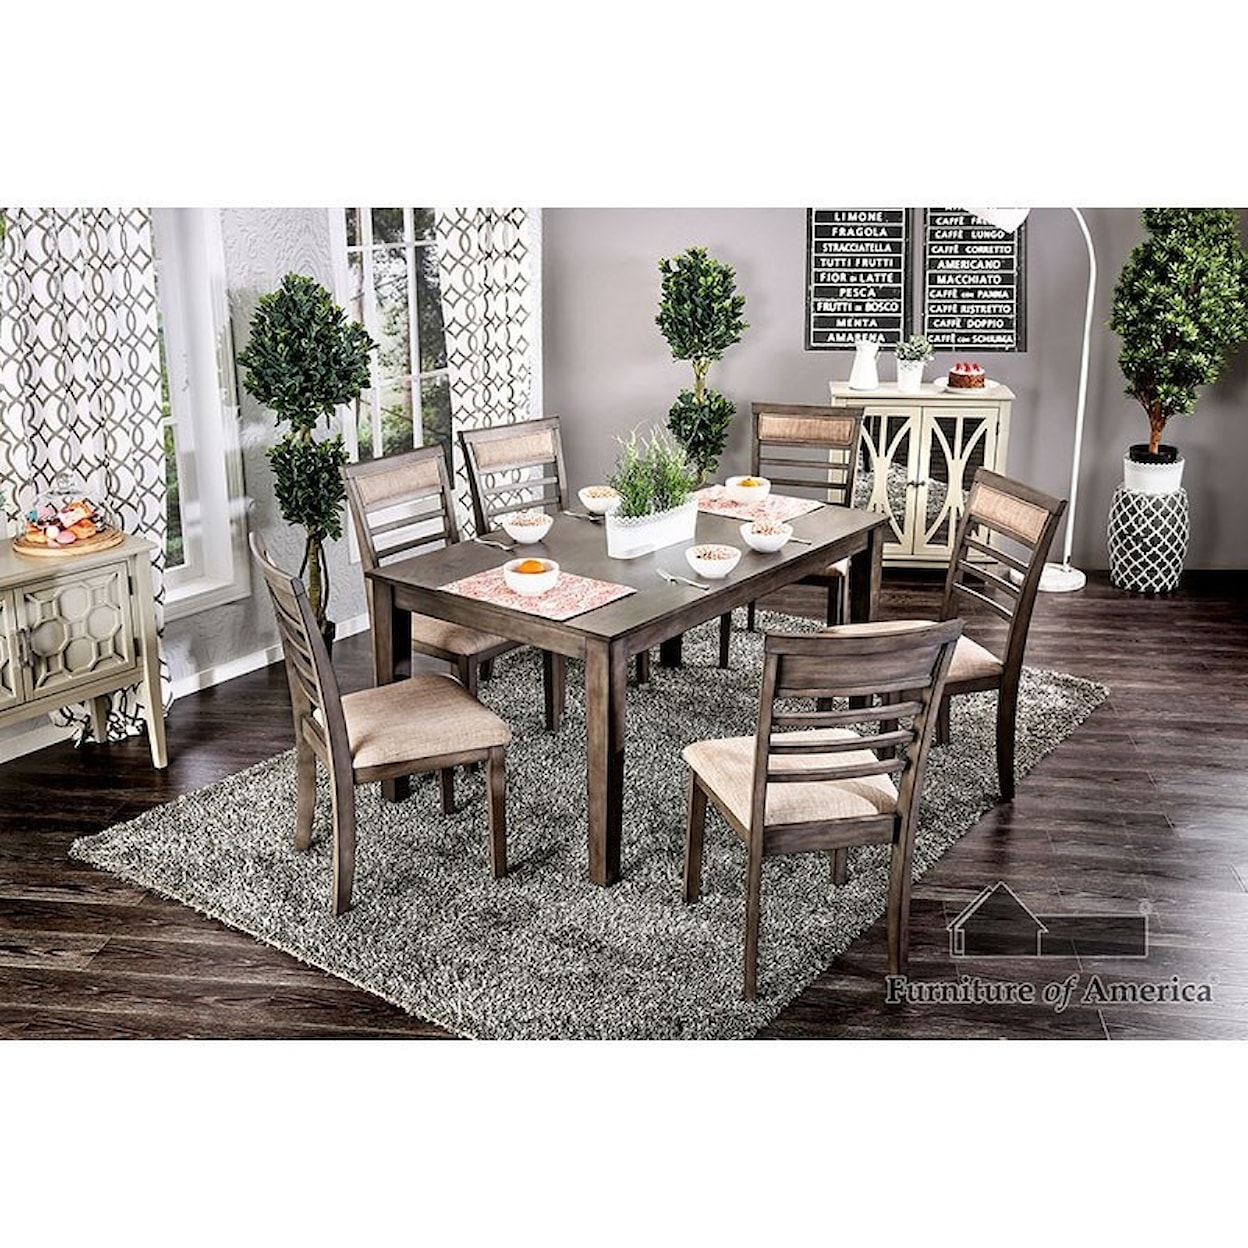 Furniture of America Taylah 7 Piece. Dining Table Set